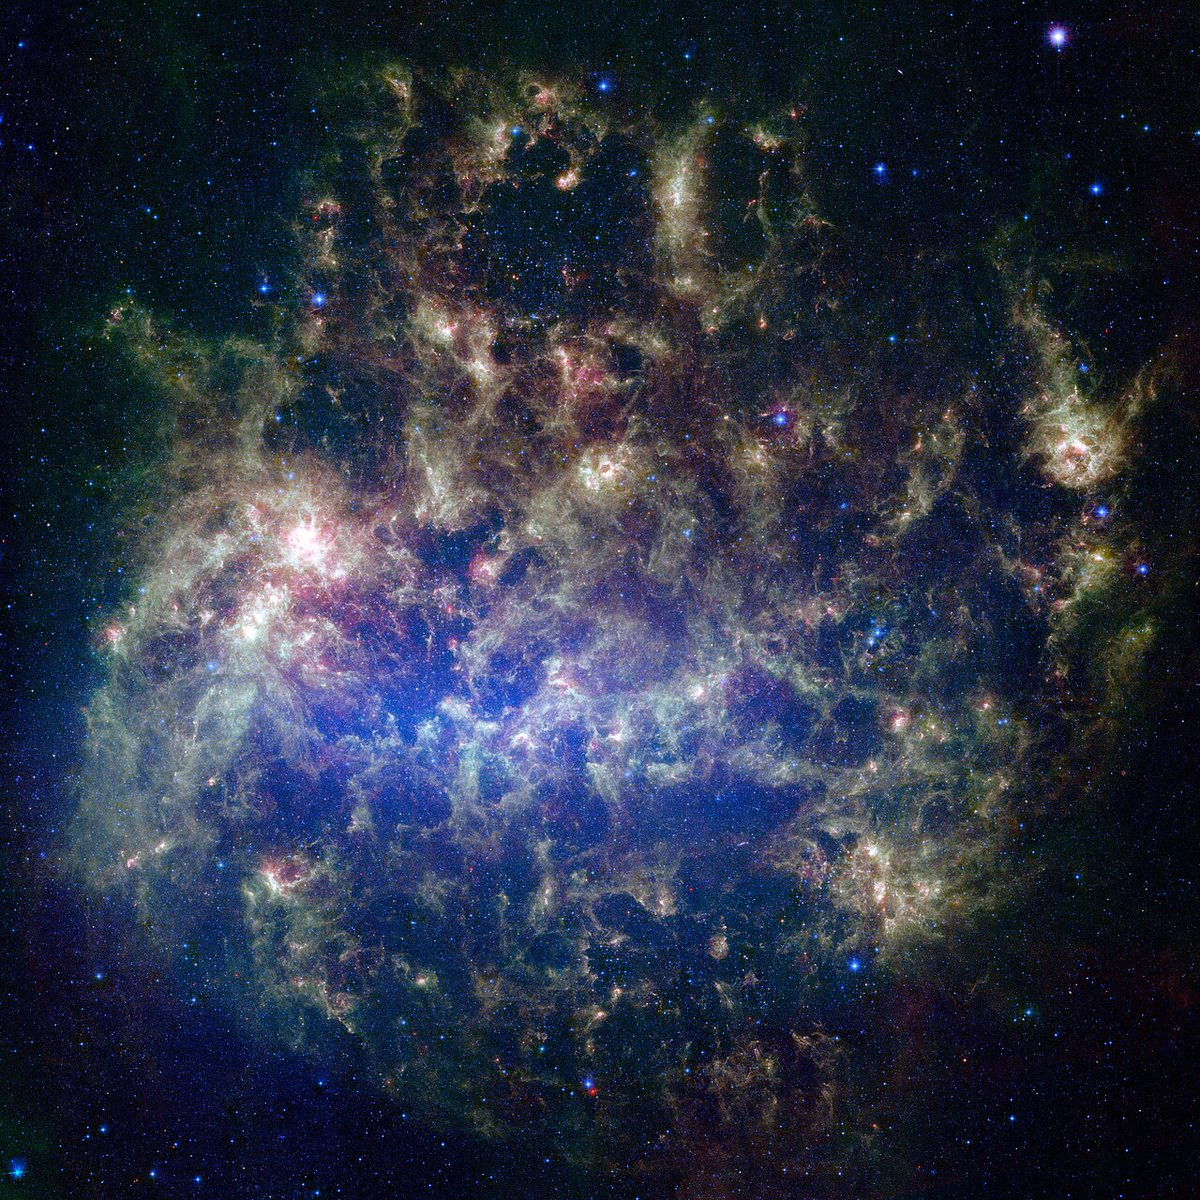 Satellite galaxy of Milky Way, Large Magellanic Cloud hosts two most extreme stars. WOH G64 - Possibly the largest known star in the universe with 1540 solar radi and 6 lakh solar luminosity. R136a1 - Most massive star known with 200 solar masses and 4.7 million solar luminosity.